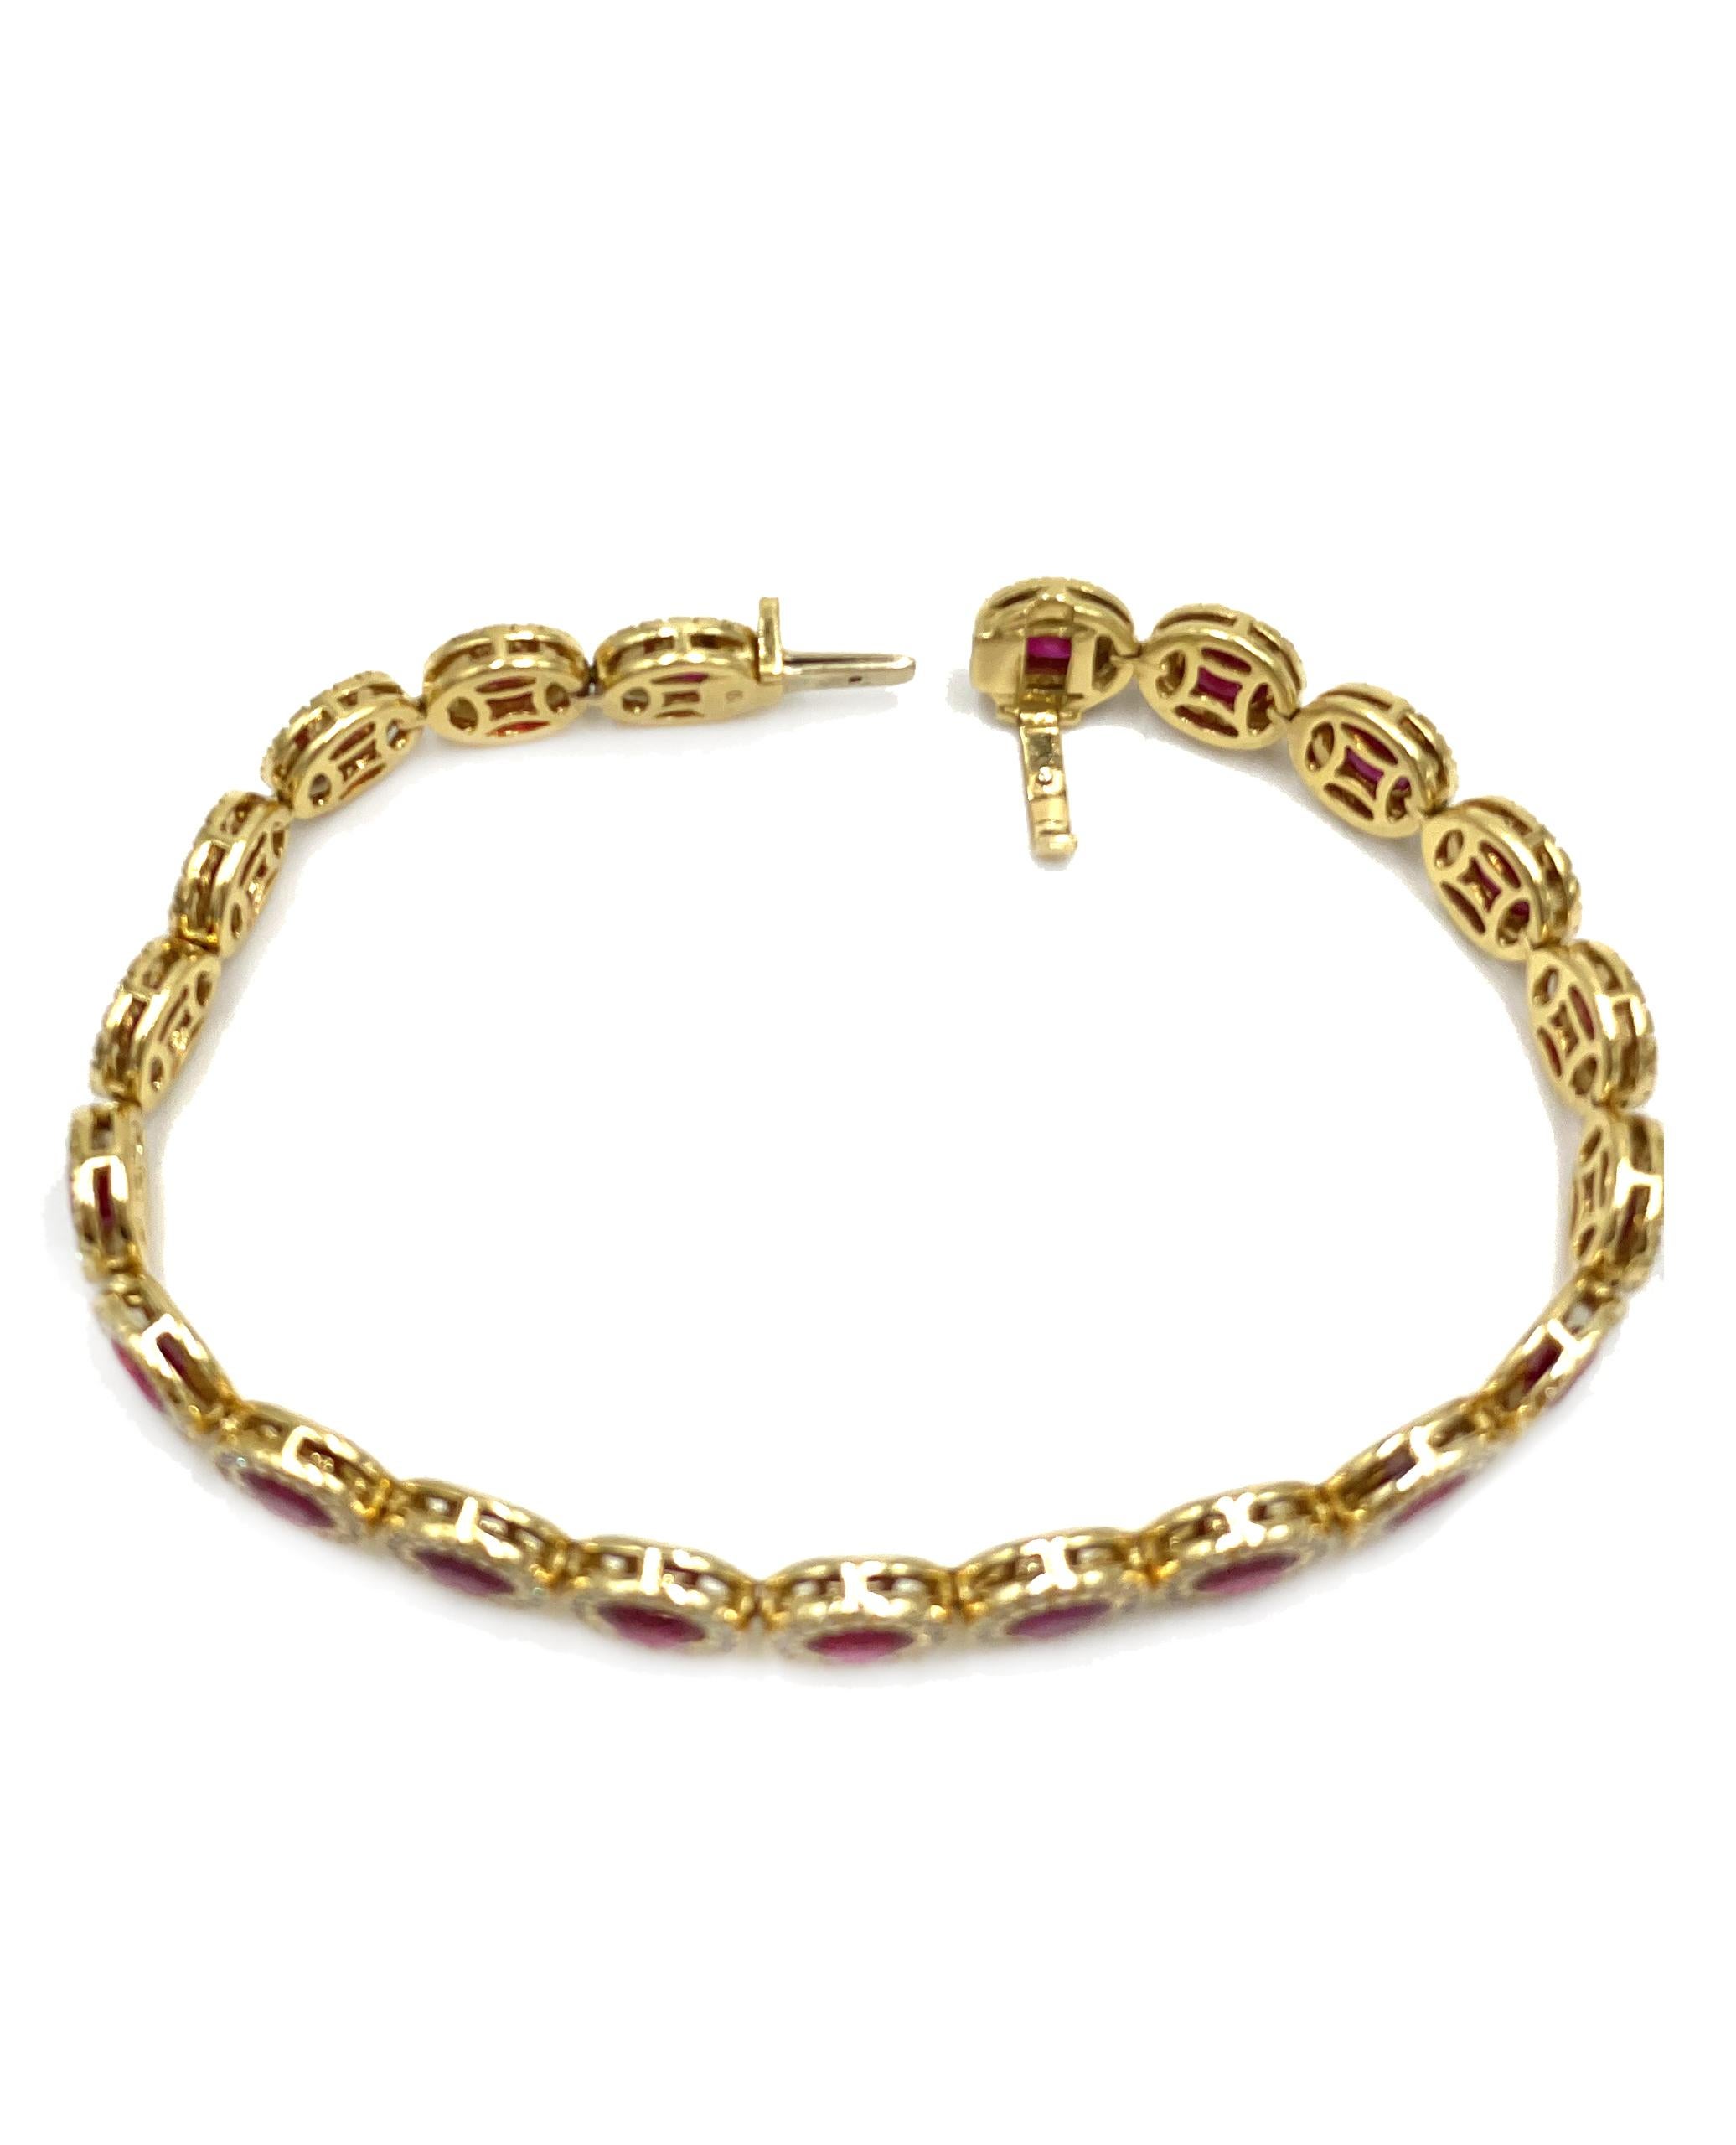 Oval Cut Ruby and Diamond Bracelet Set in 18K Yellow Gold For Sale